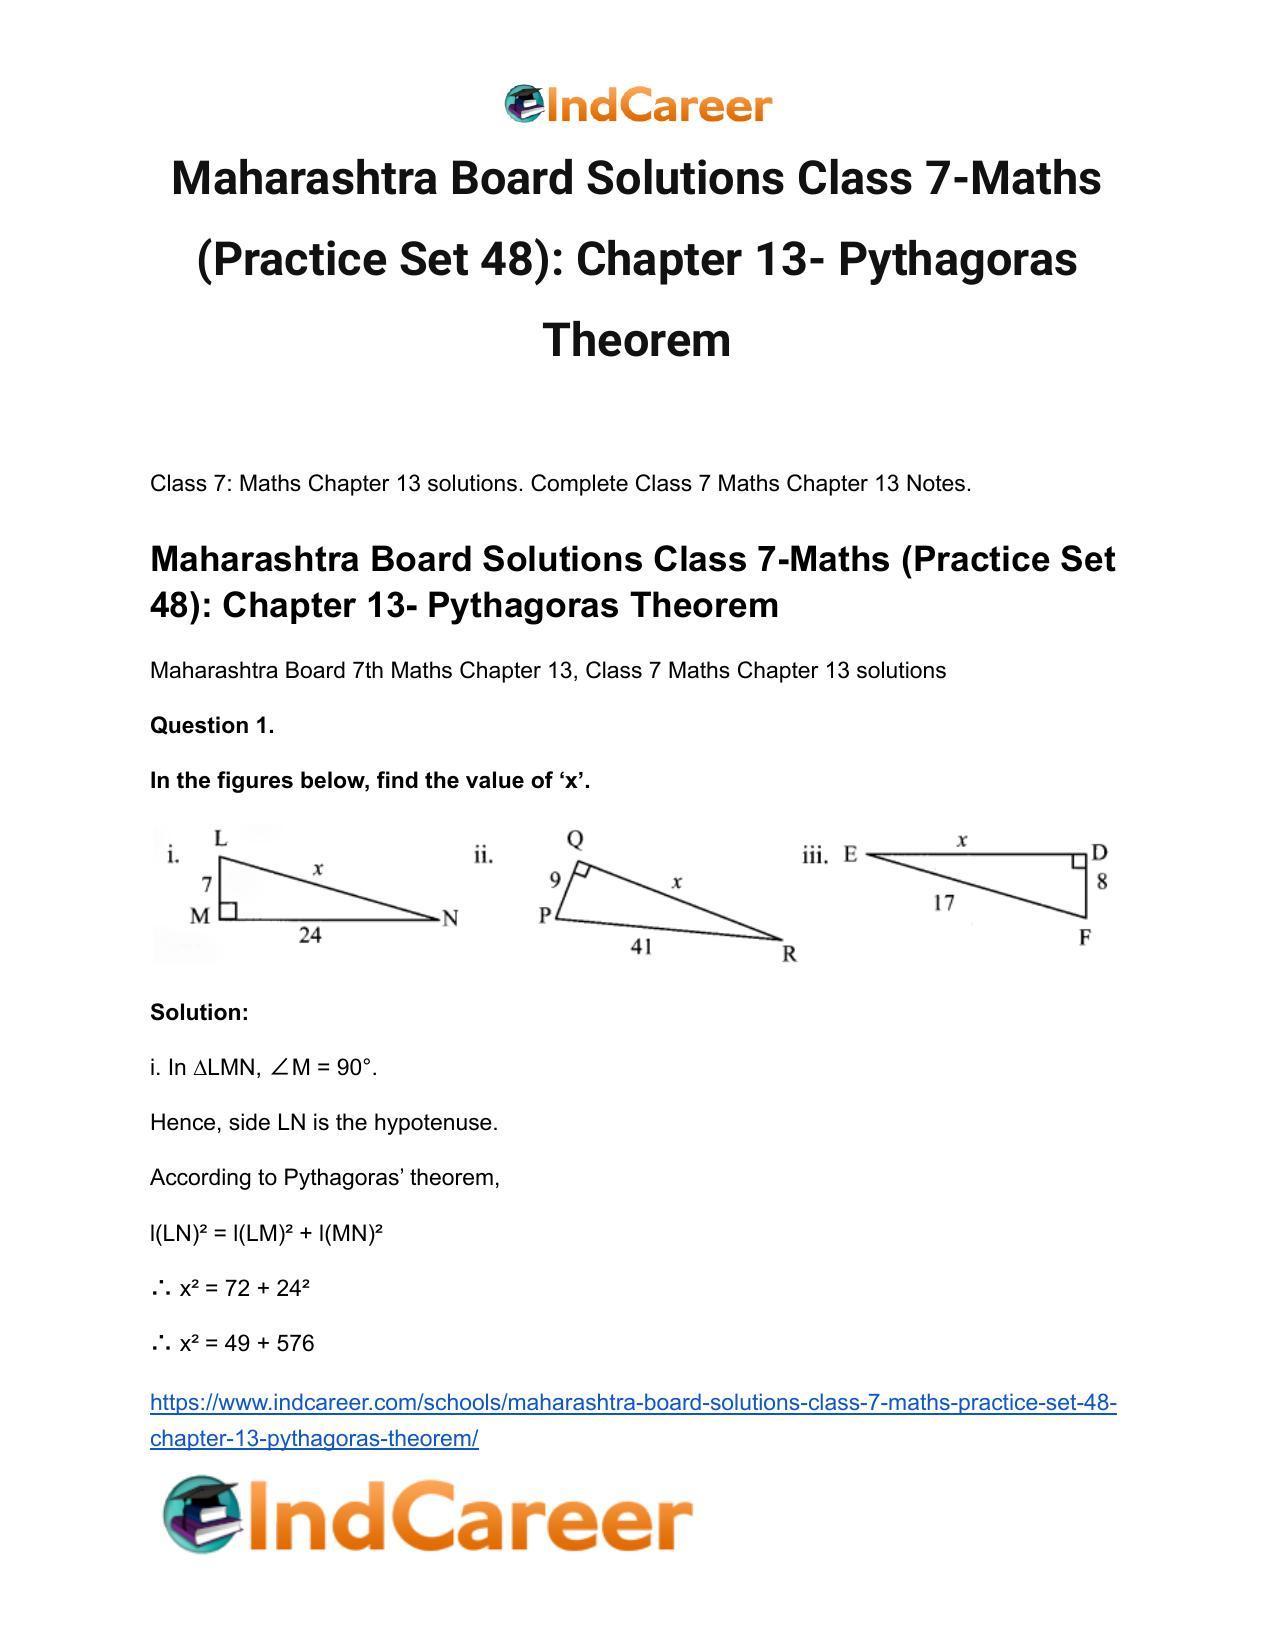 Maharashtra Board Solutions Class 7-Maths (Practice Set 48): Chapter 13- Pythagoras Theorem - Page 2